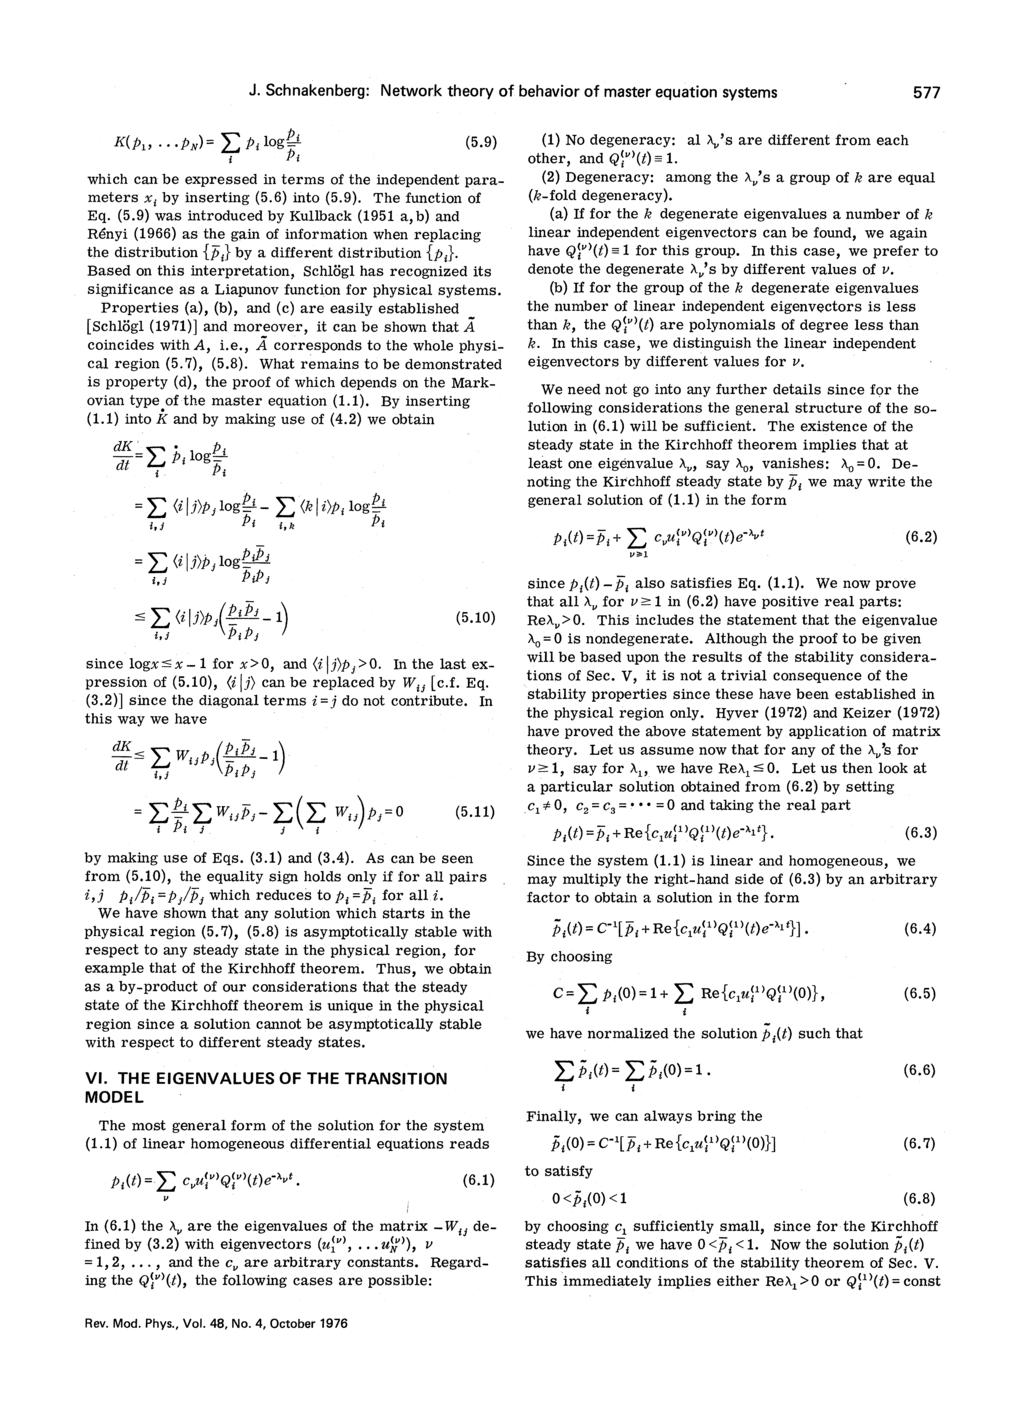 J. Schnakenberg: Network theory of behavior of master equation systems (5 9) which can be expressed in terms of the independent parameters x,. by inserting (5.6) into (5.9). The function of Eq. (5.9) was introduced by Kullback (1951 a, b) and Renyi (1966) as the gain of information when replacing the distribution (p,.